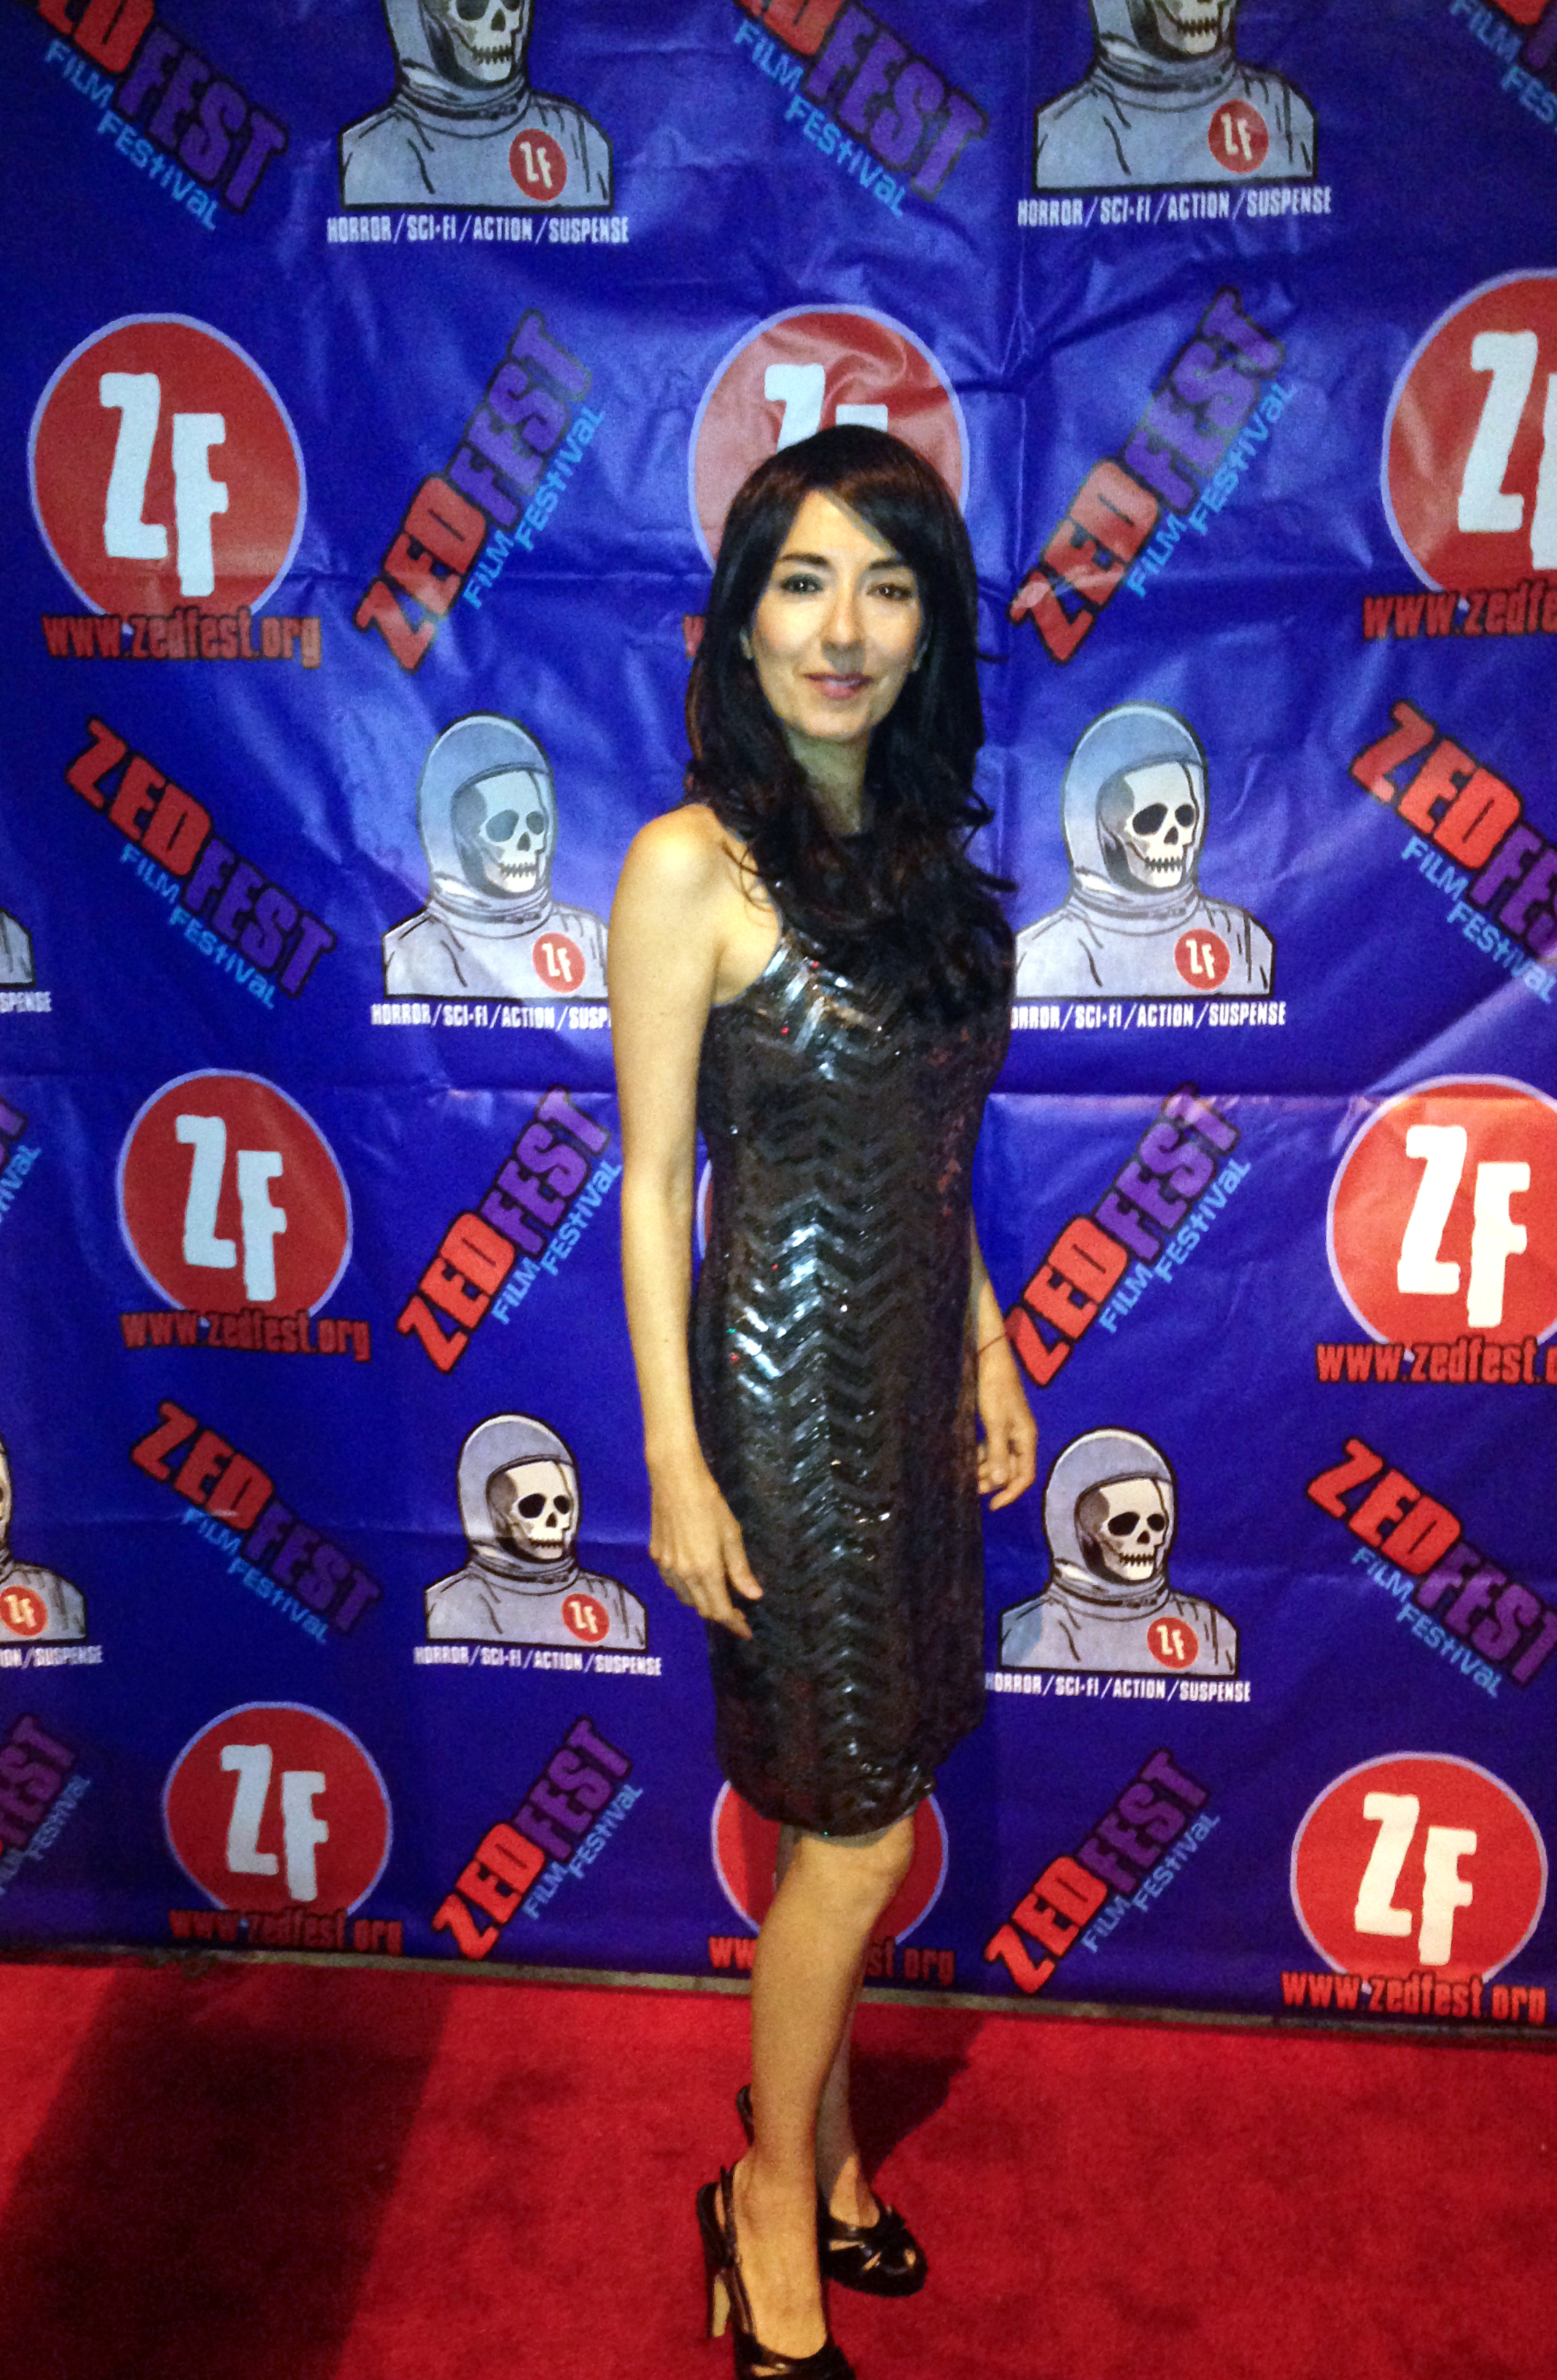 Luciana Lagana, who played Dr. Itticasana, at the premiere of the multiple award-winning feature film Omadox at Zed Fest Film Festival in Burbank, CA on 12/14/14.